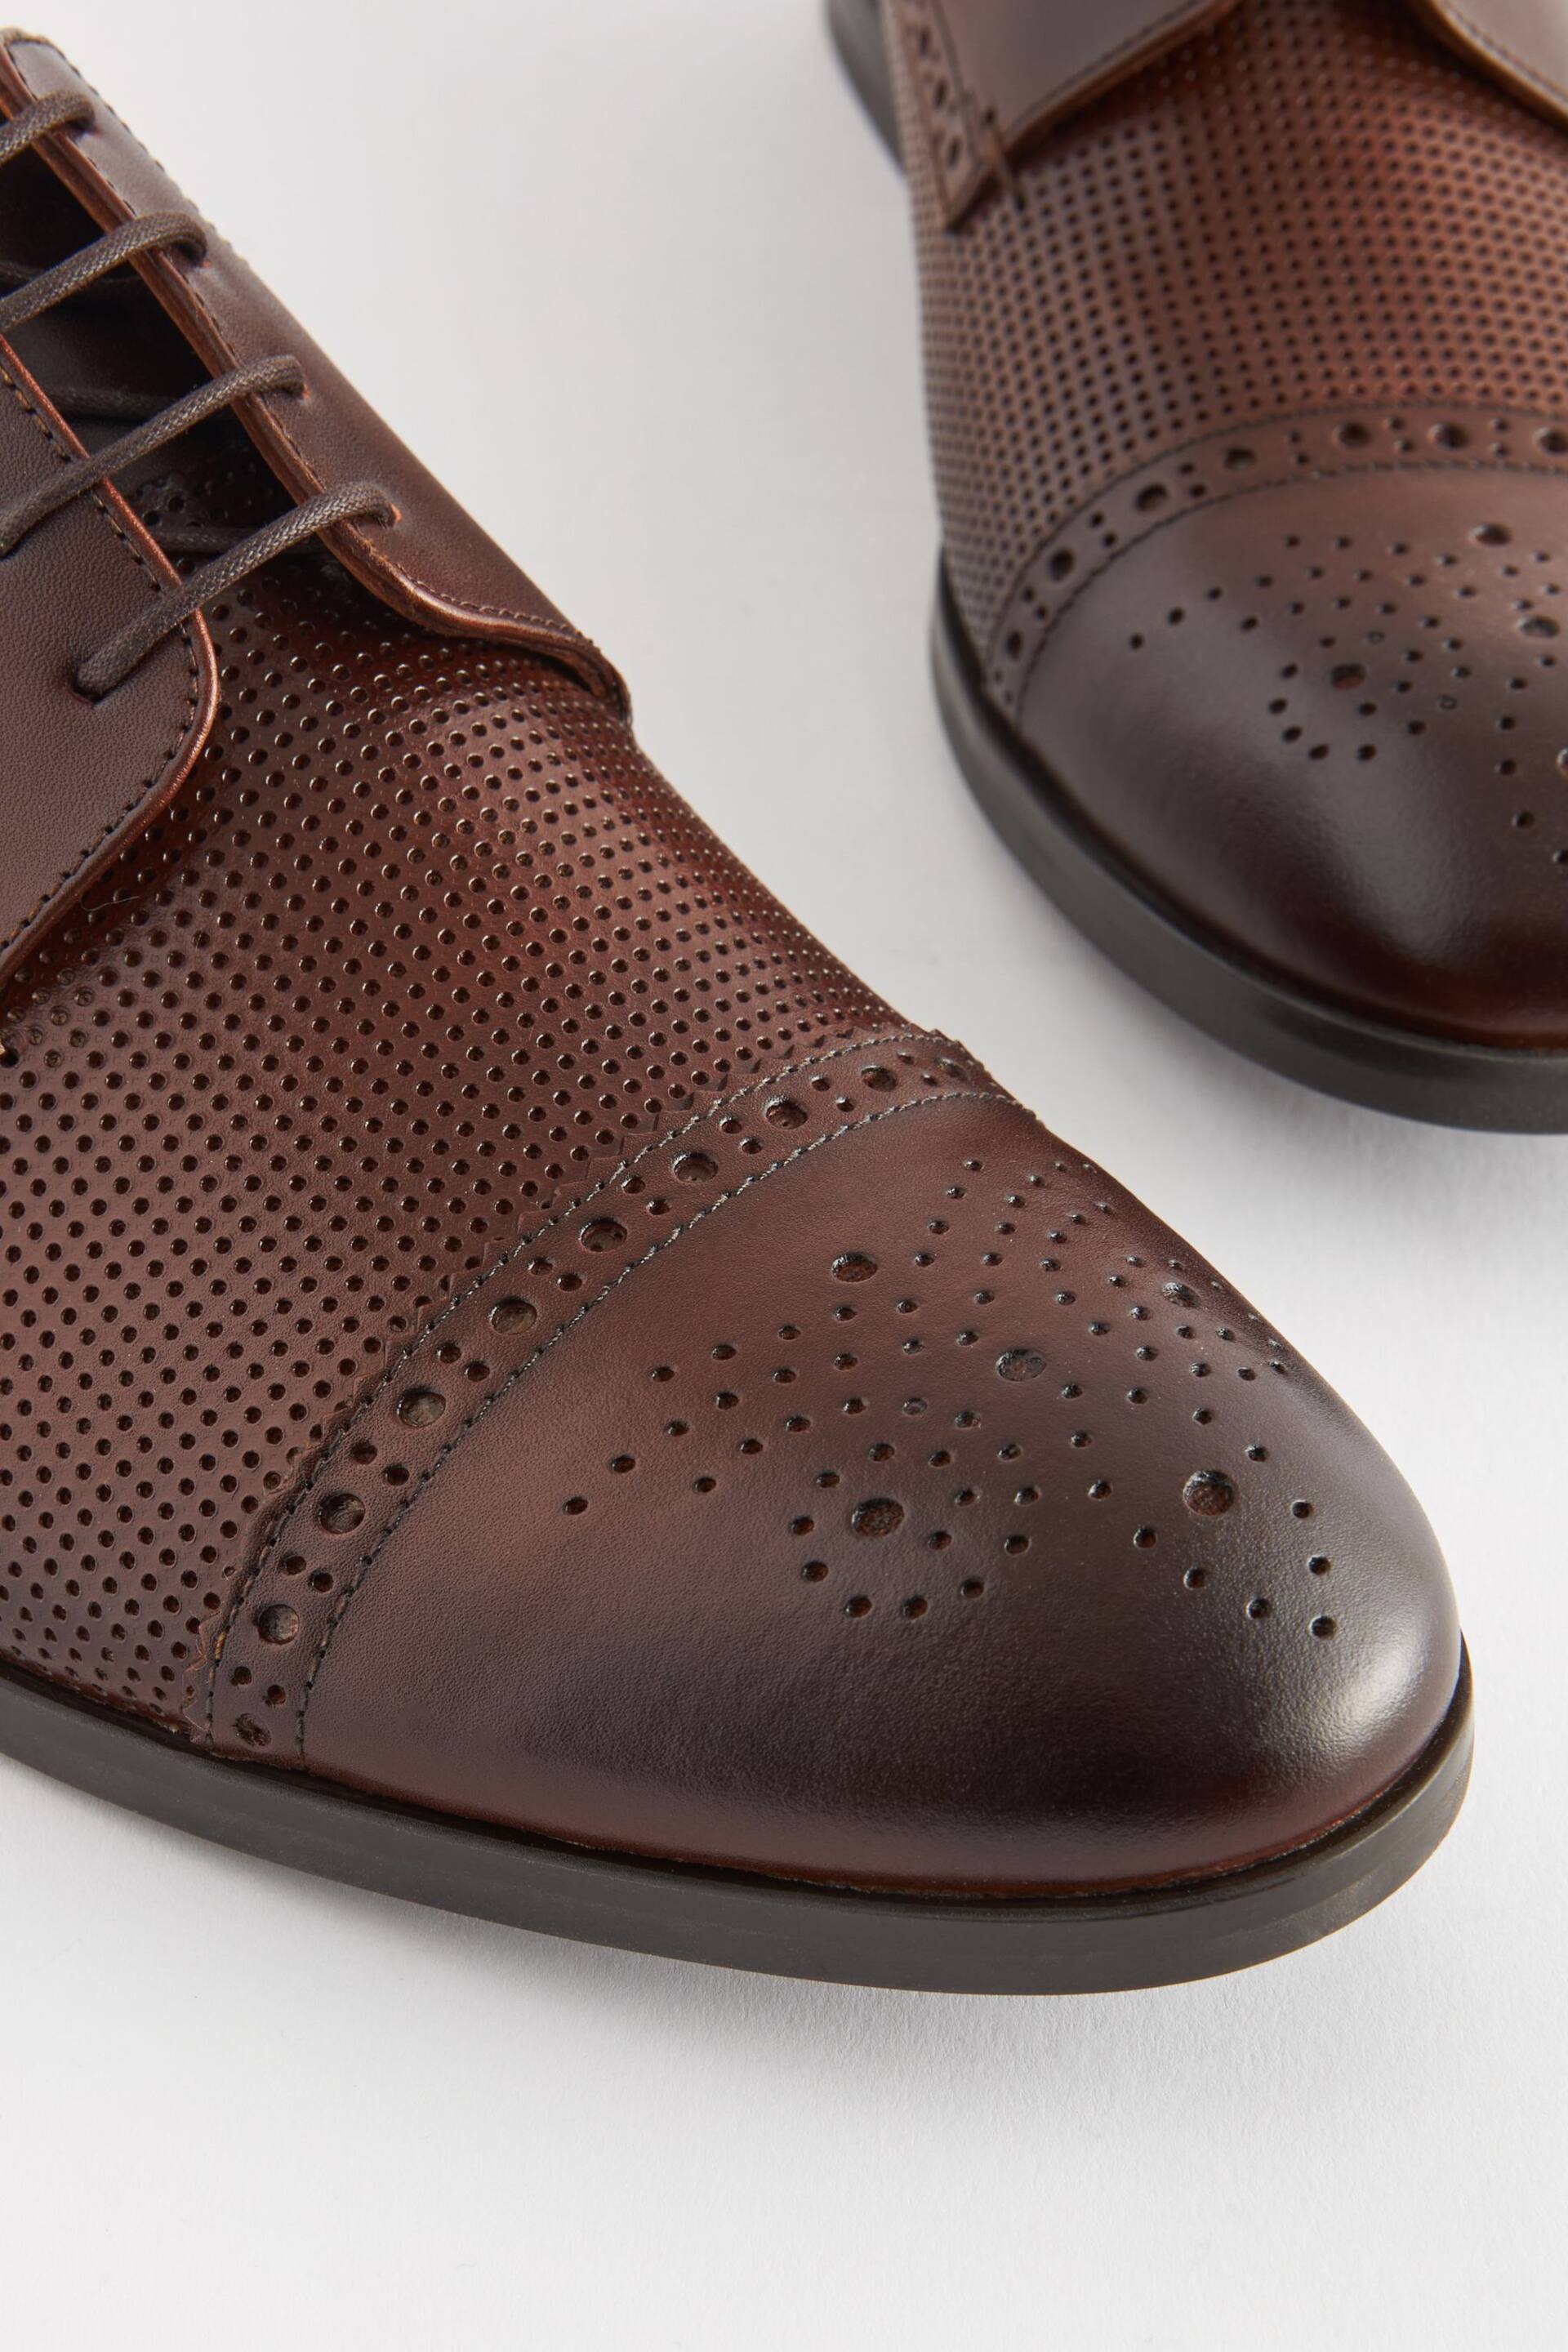 Brown Leather Embossed Brogues Shoes - Image 4 of 7